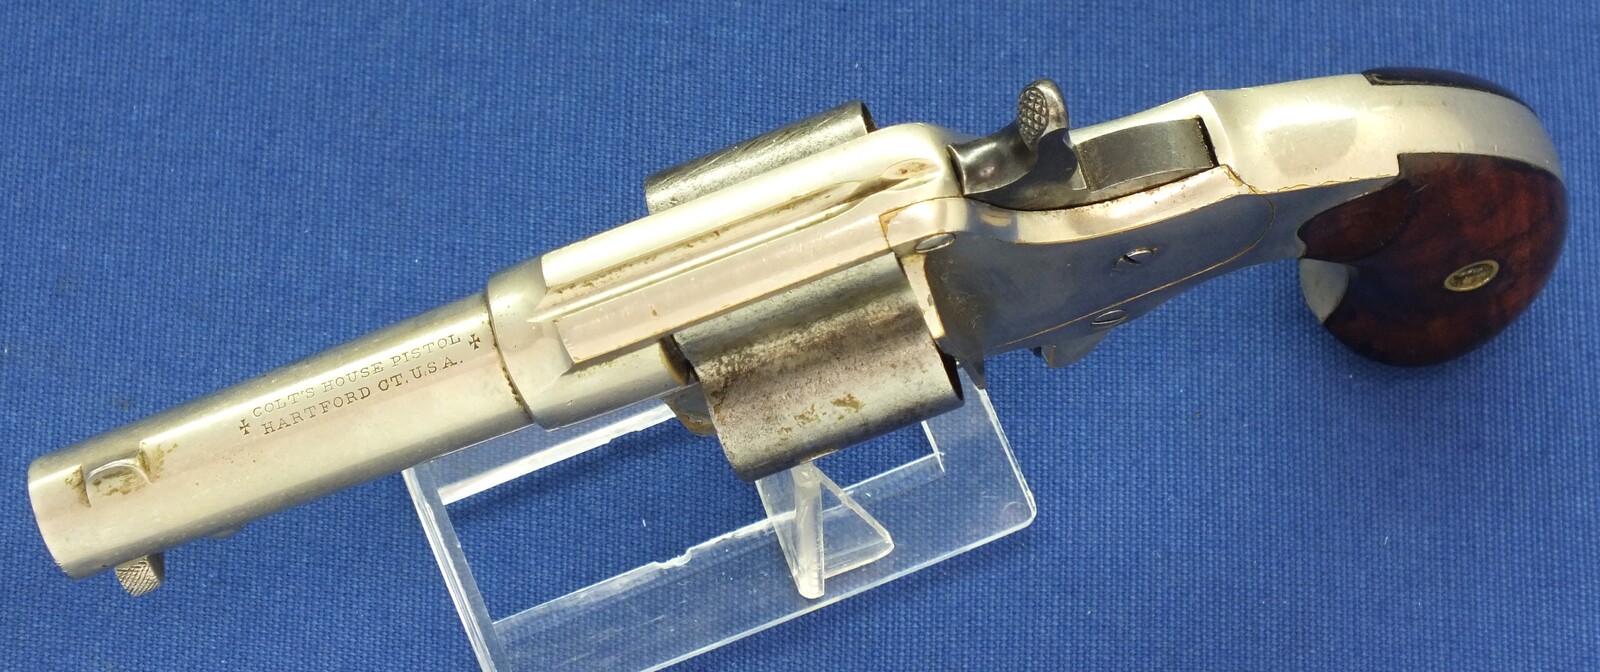 An antique American Nickel Plated Colt House Cloverleaf Model Revolver with 3 inch round barrel with Hartford address. 4 shot .41 Rimfire Caliber. Length 18,5cm. In very good condition. Price 1.850 euro.